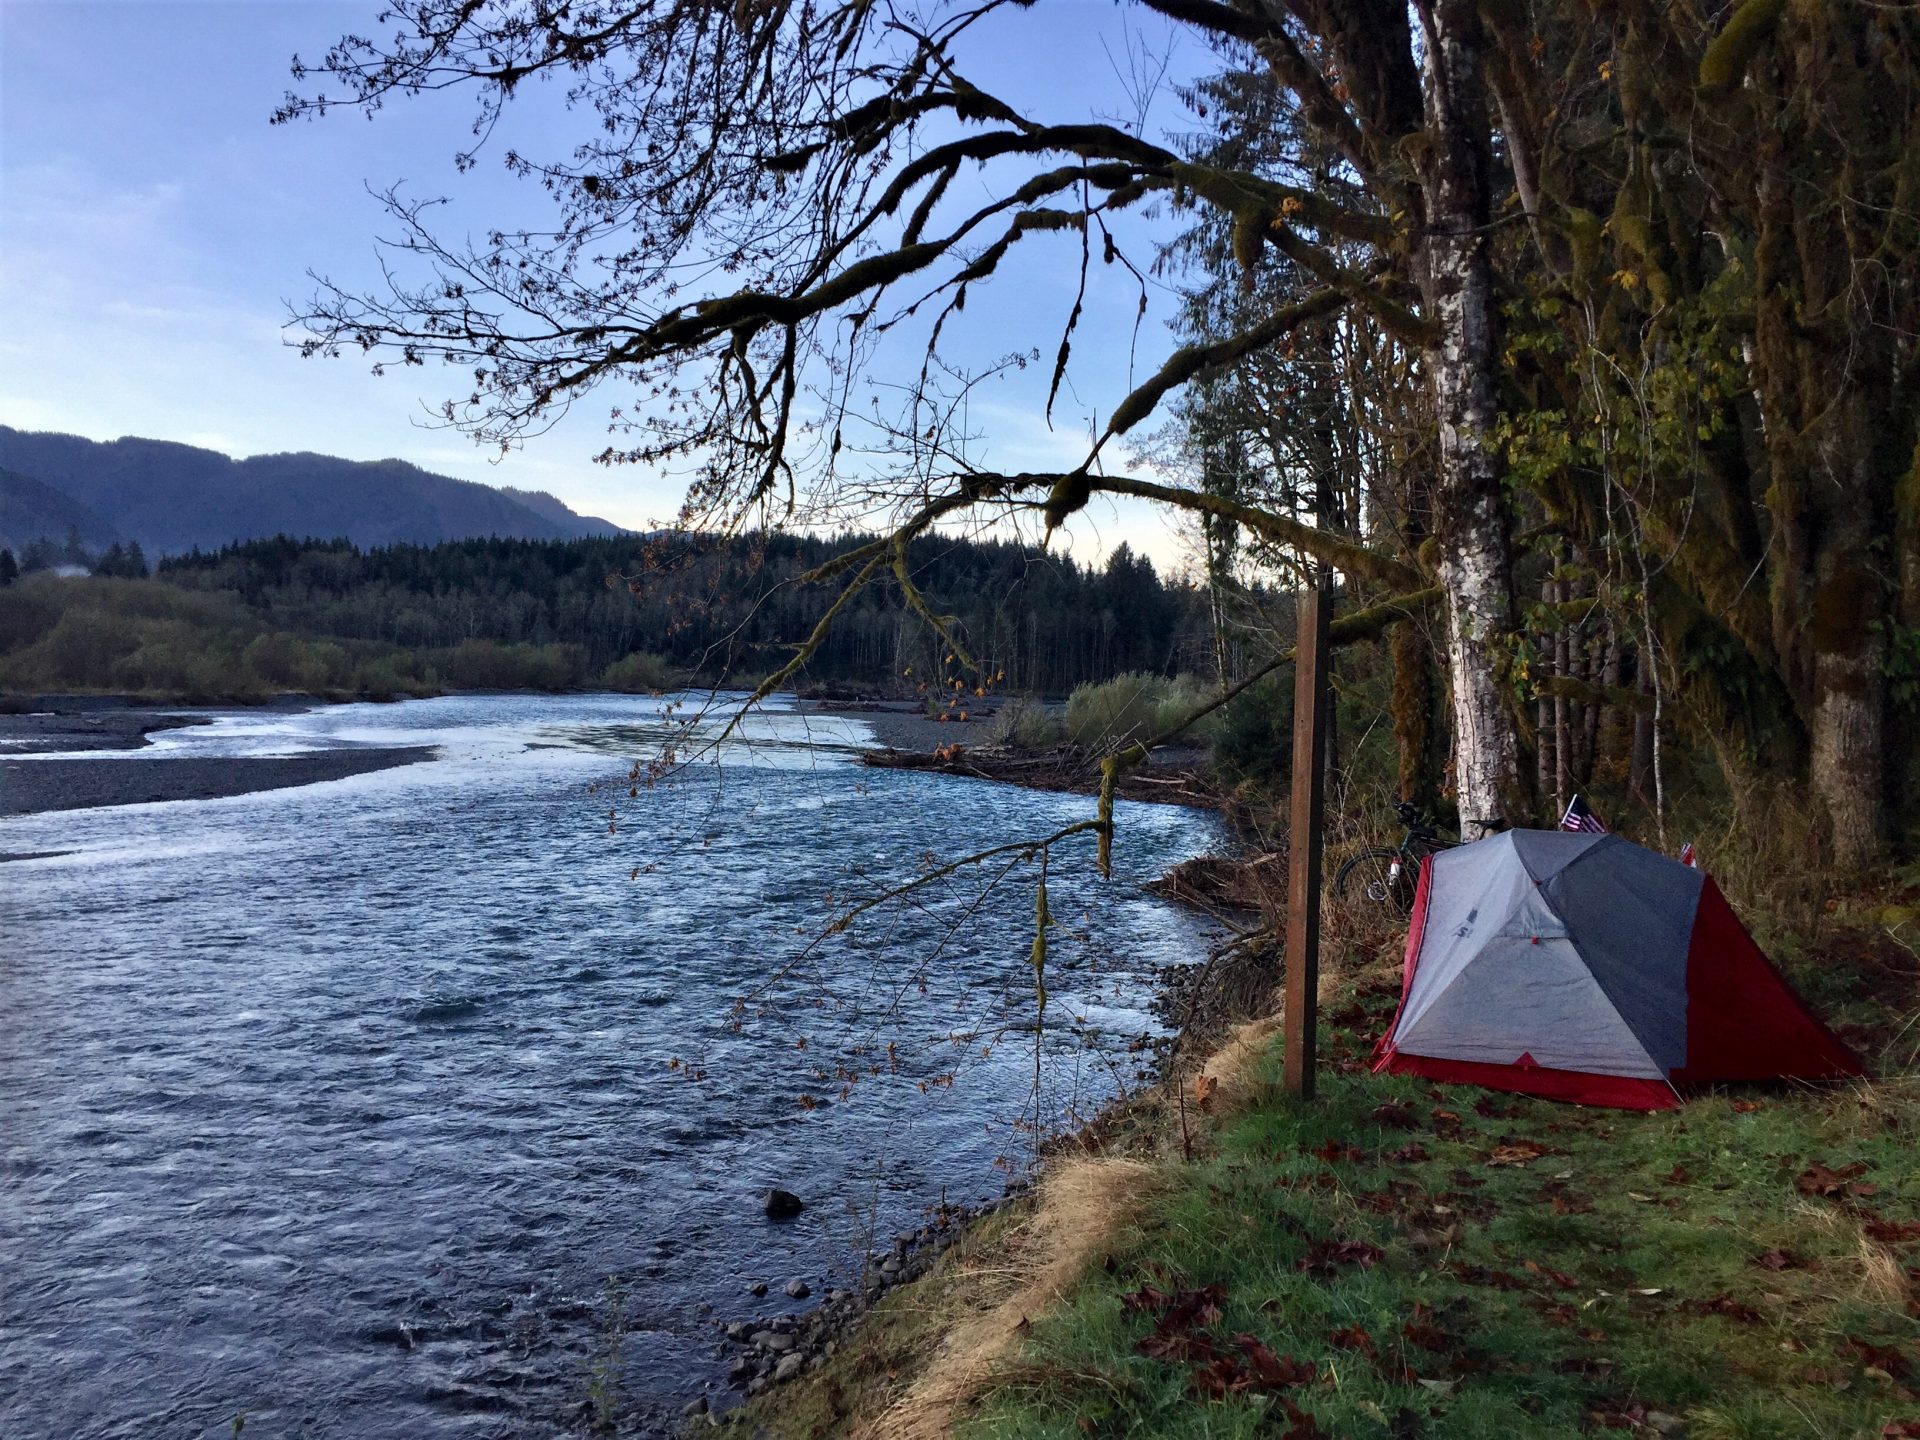 stealth camping along the river